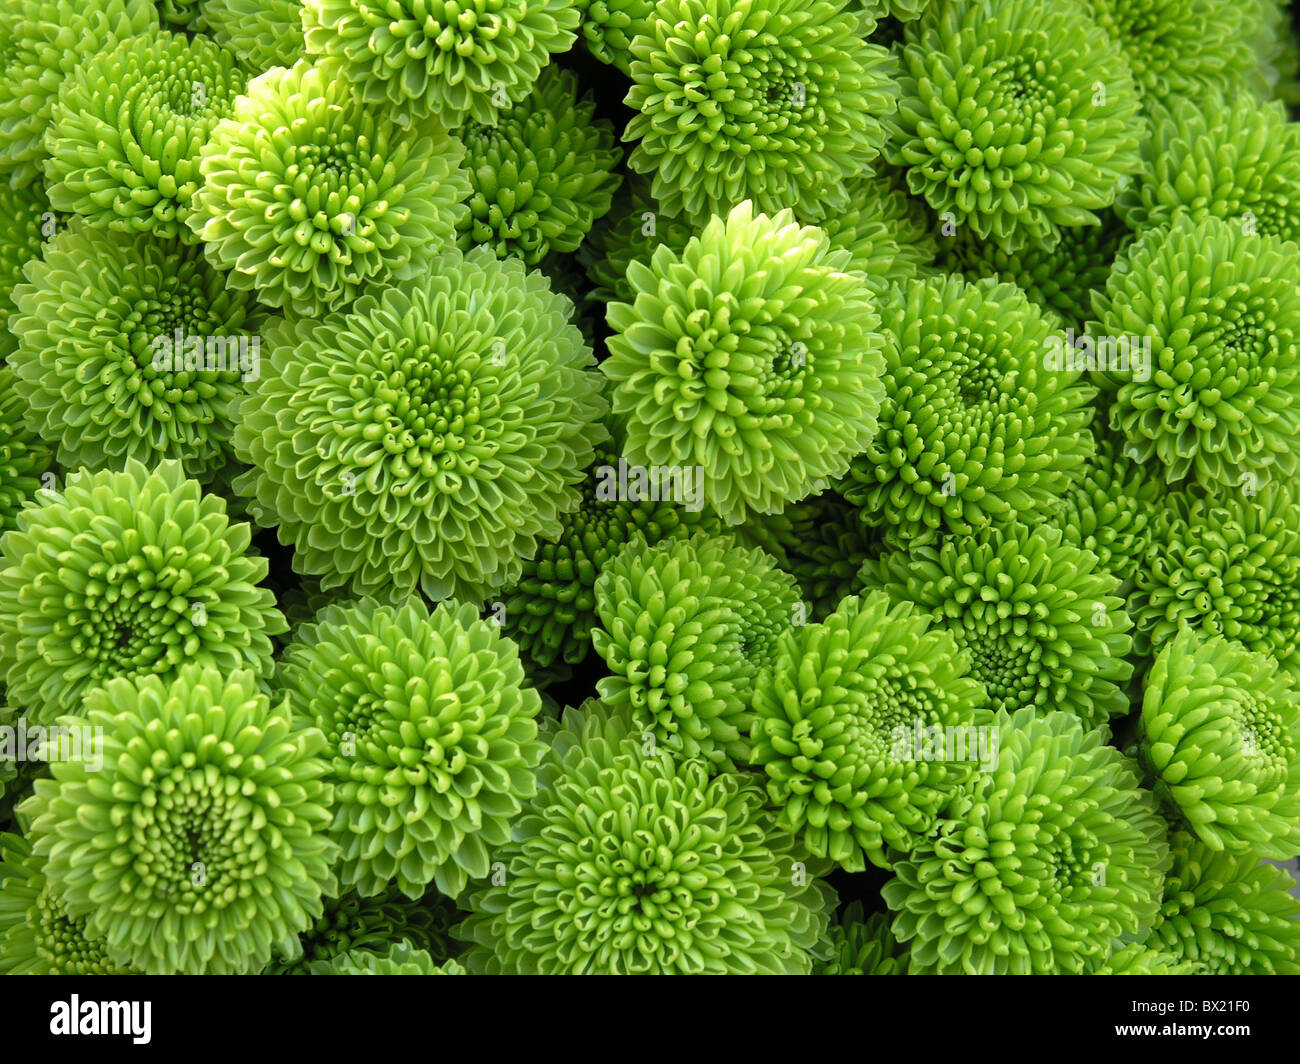 Flowers green blossoms round structure Stock Photo